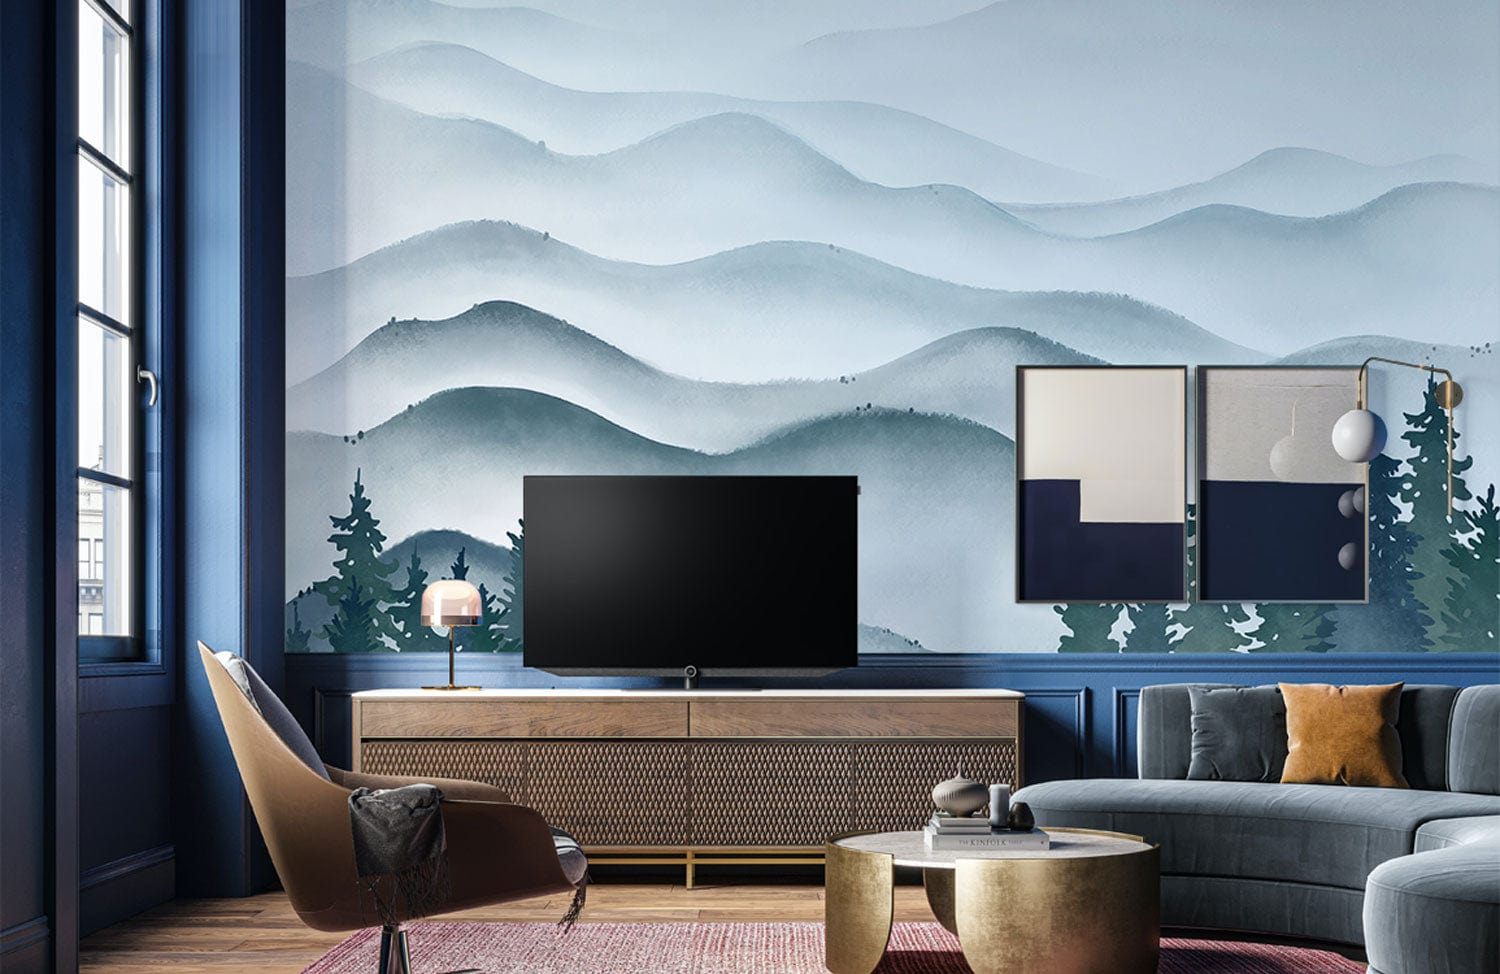 Wallcovering Mural of Ink Mountain Waves, Appropriate for Use in the Decoration of the Living Room